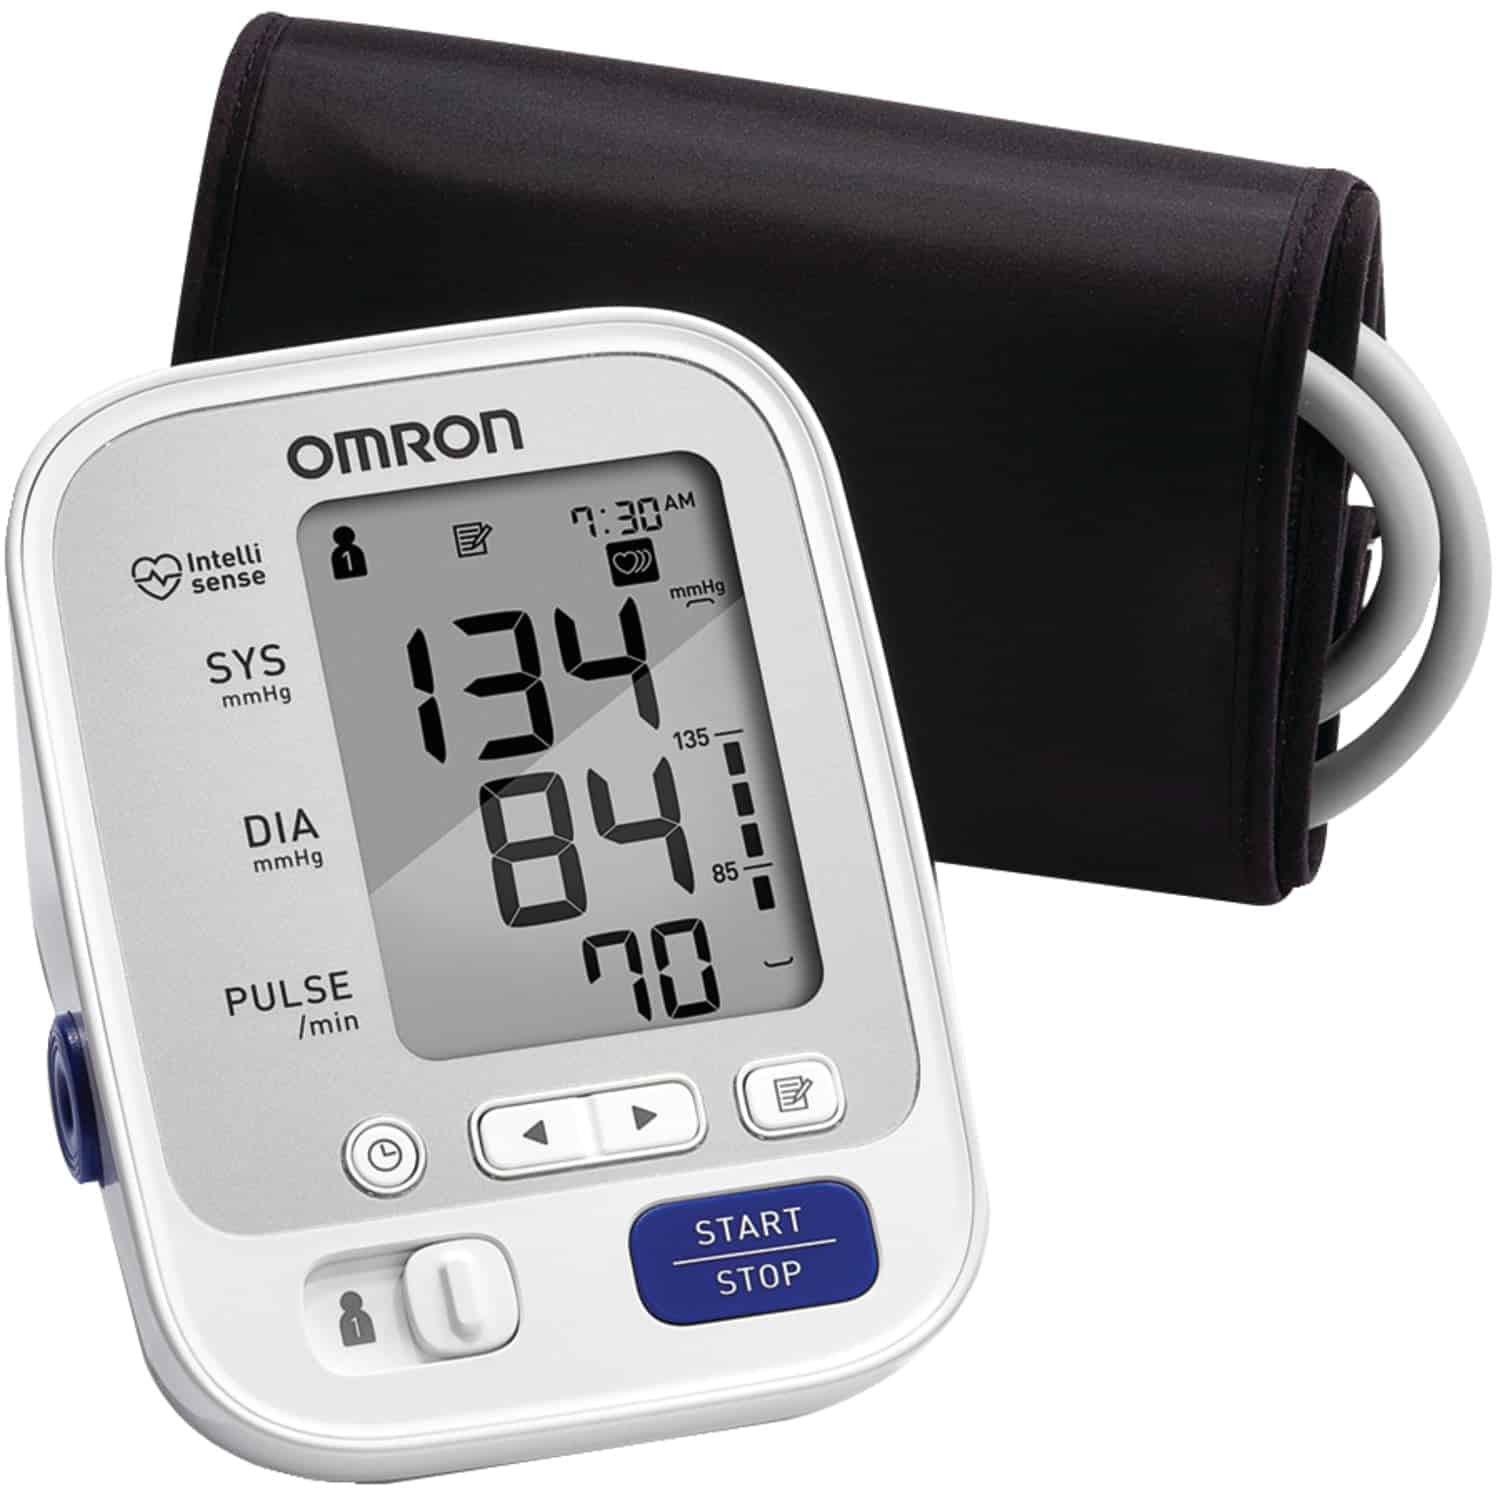 Omron 5 Series Upper Arm Blood Pressure Monitor with Cuff, Standard ...